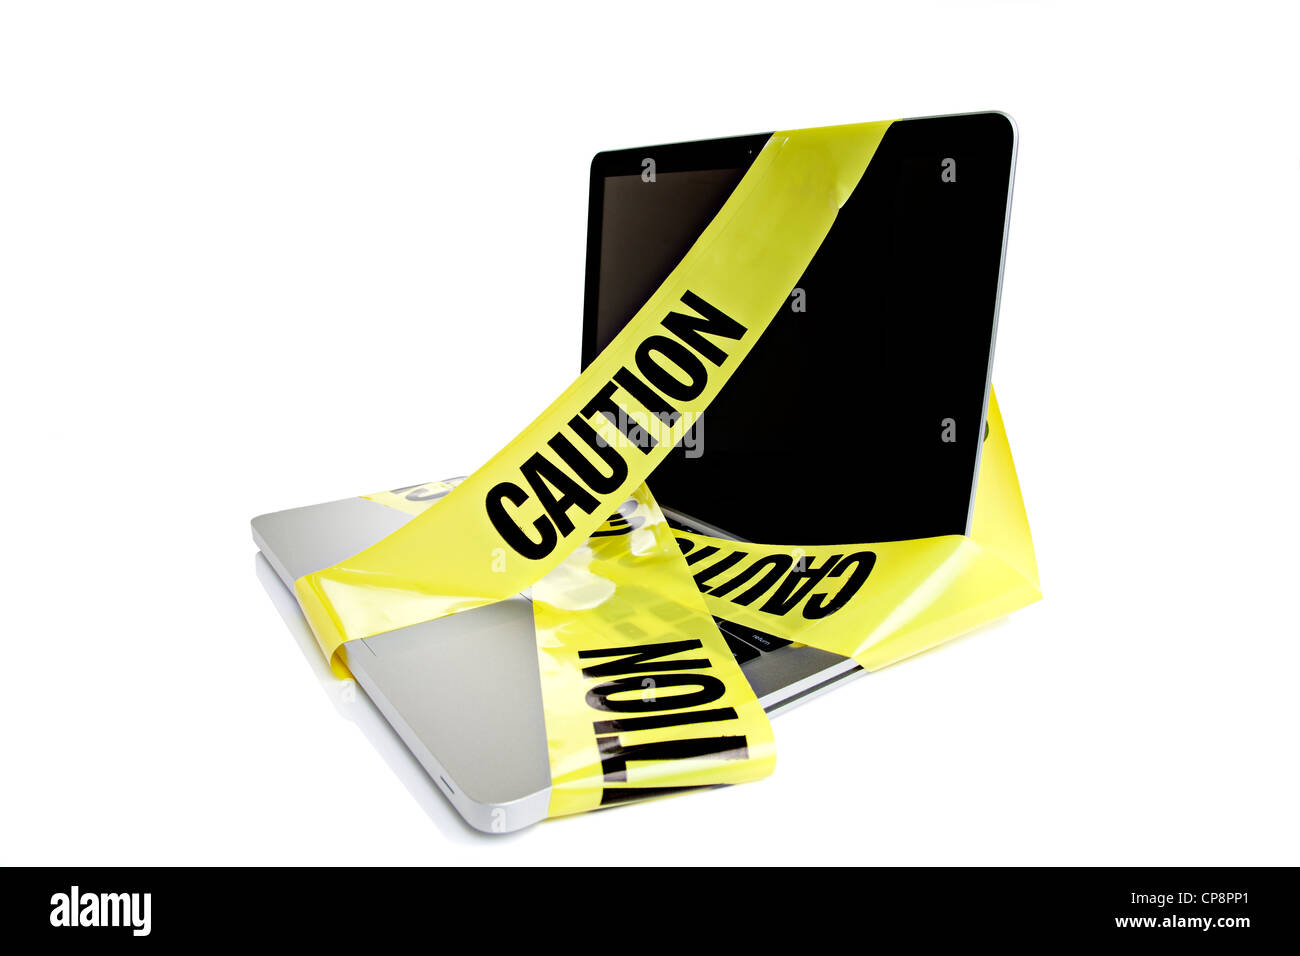 Laptop computer with caution tape wrapped around it Stock Photo